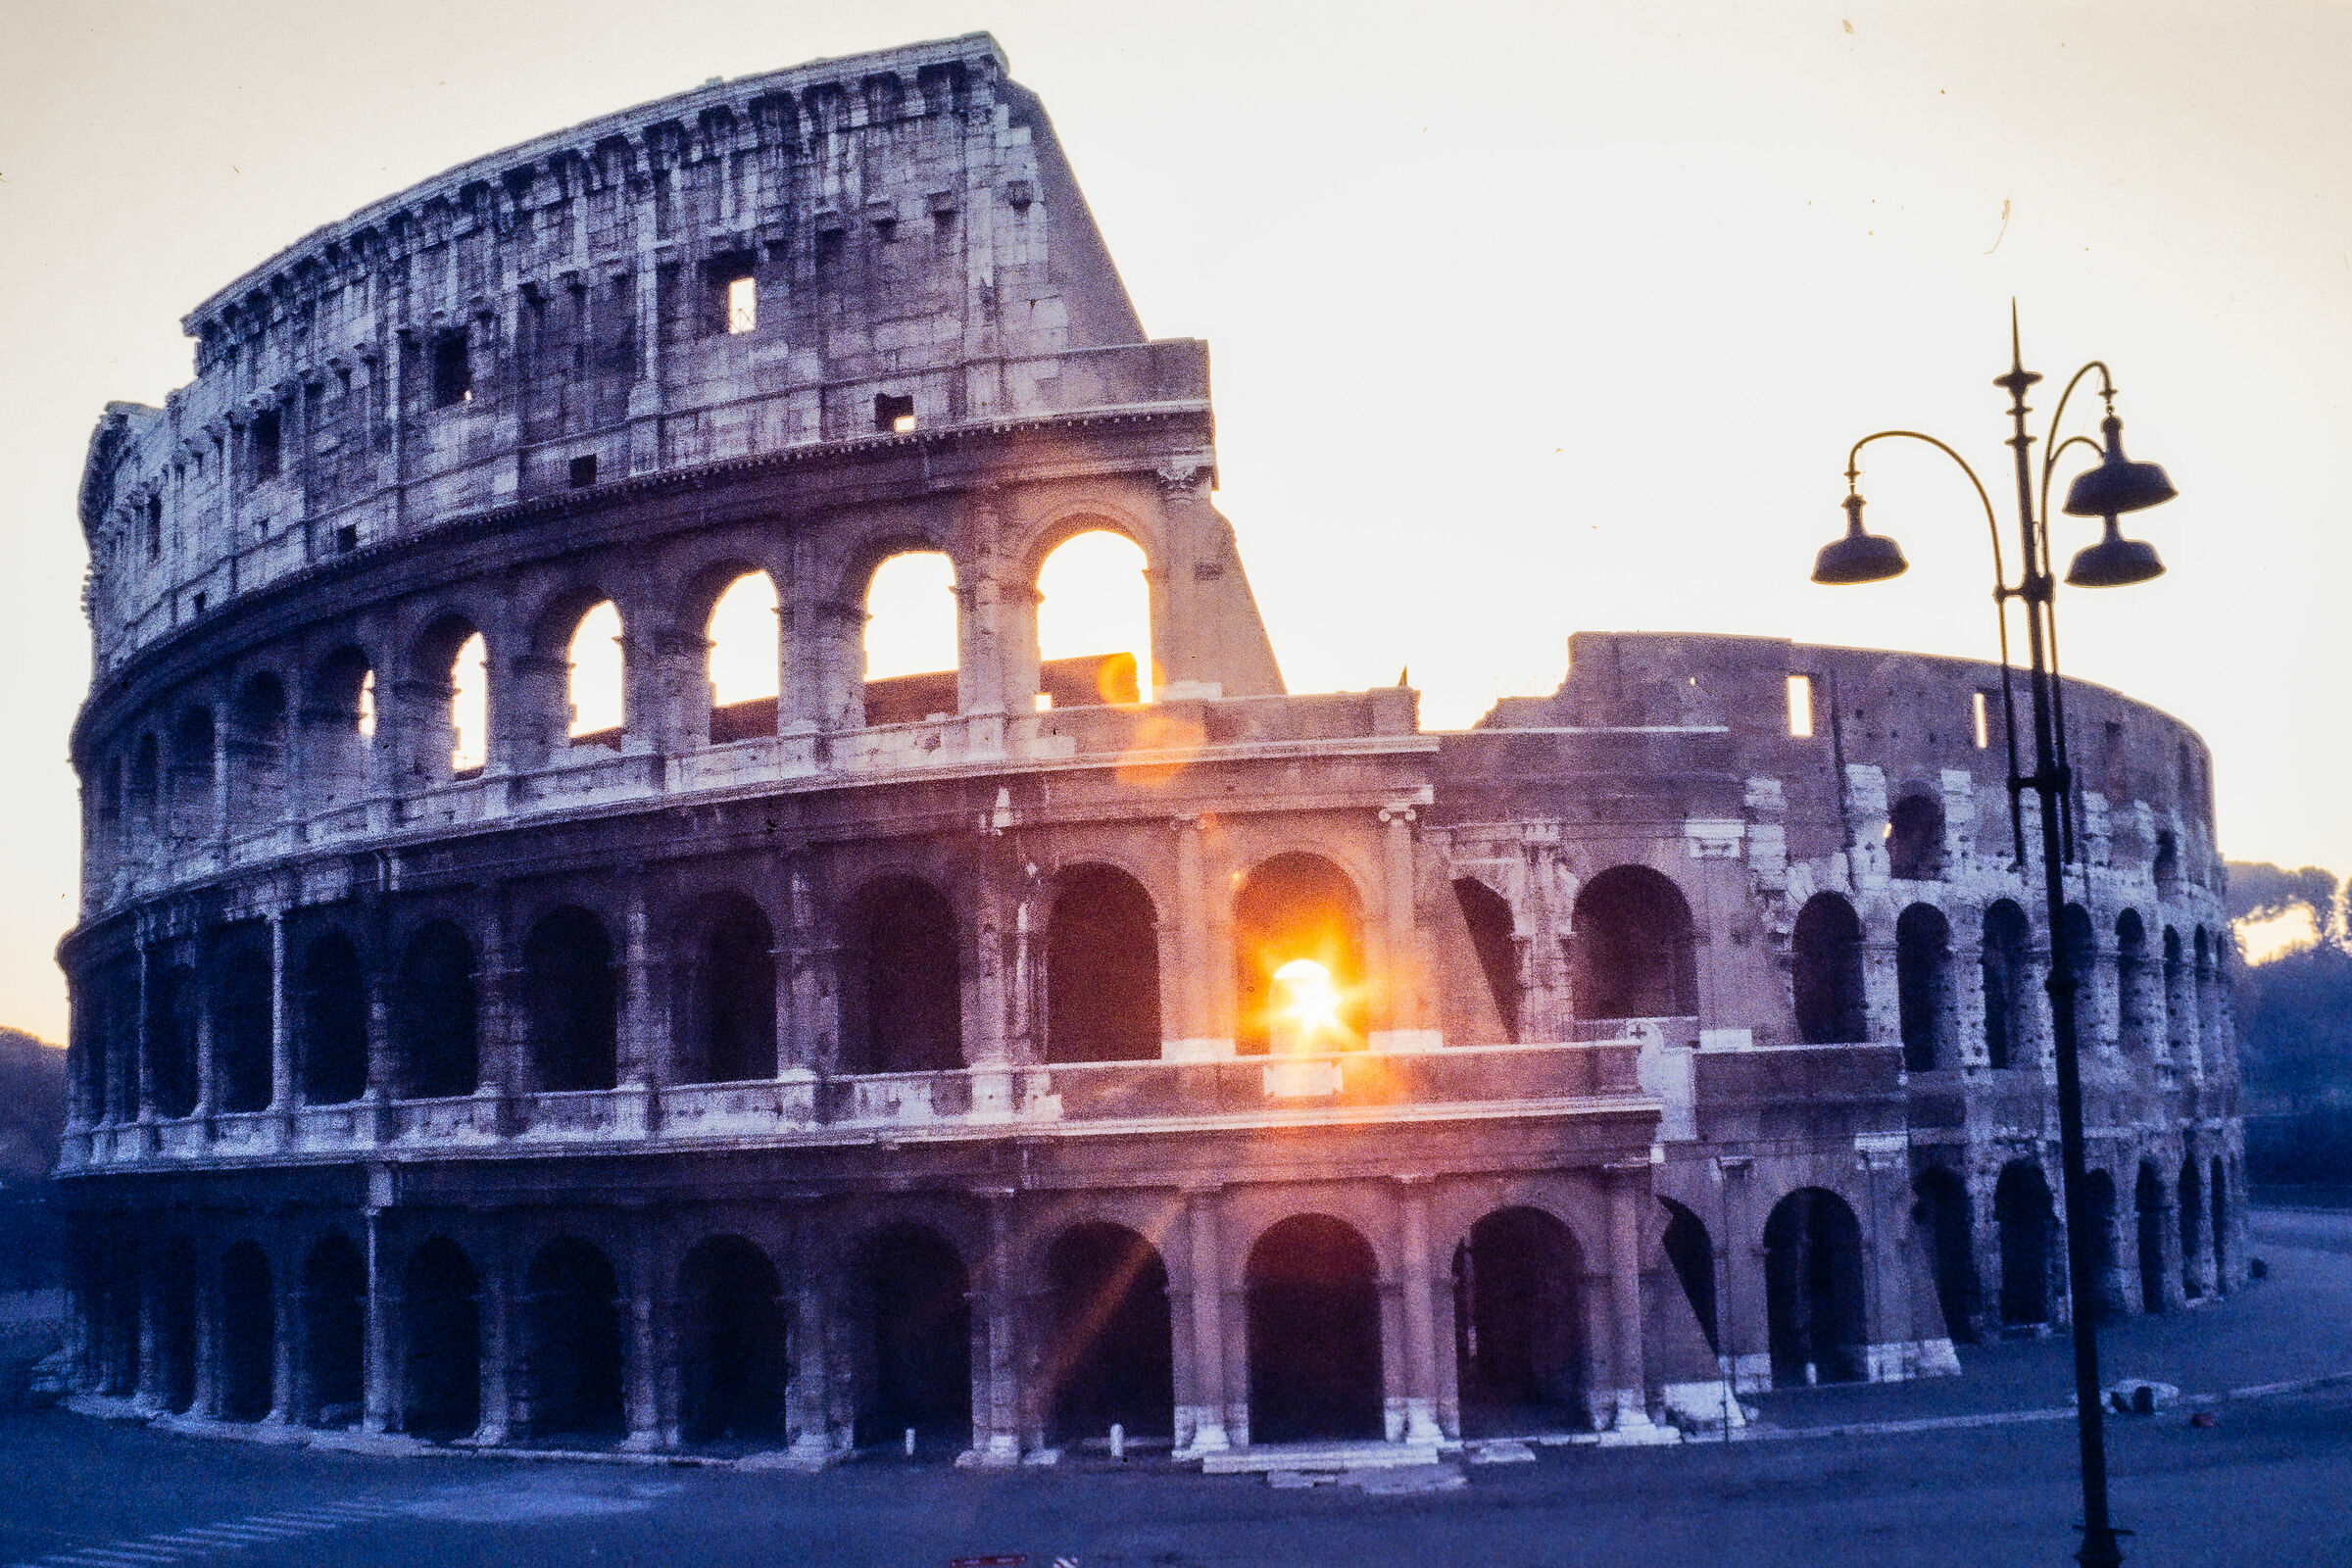 Sunrise at the Colosseum 2...